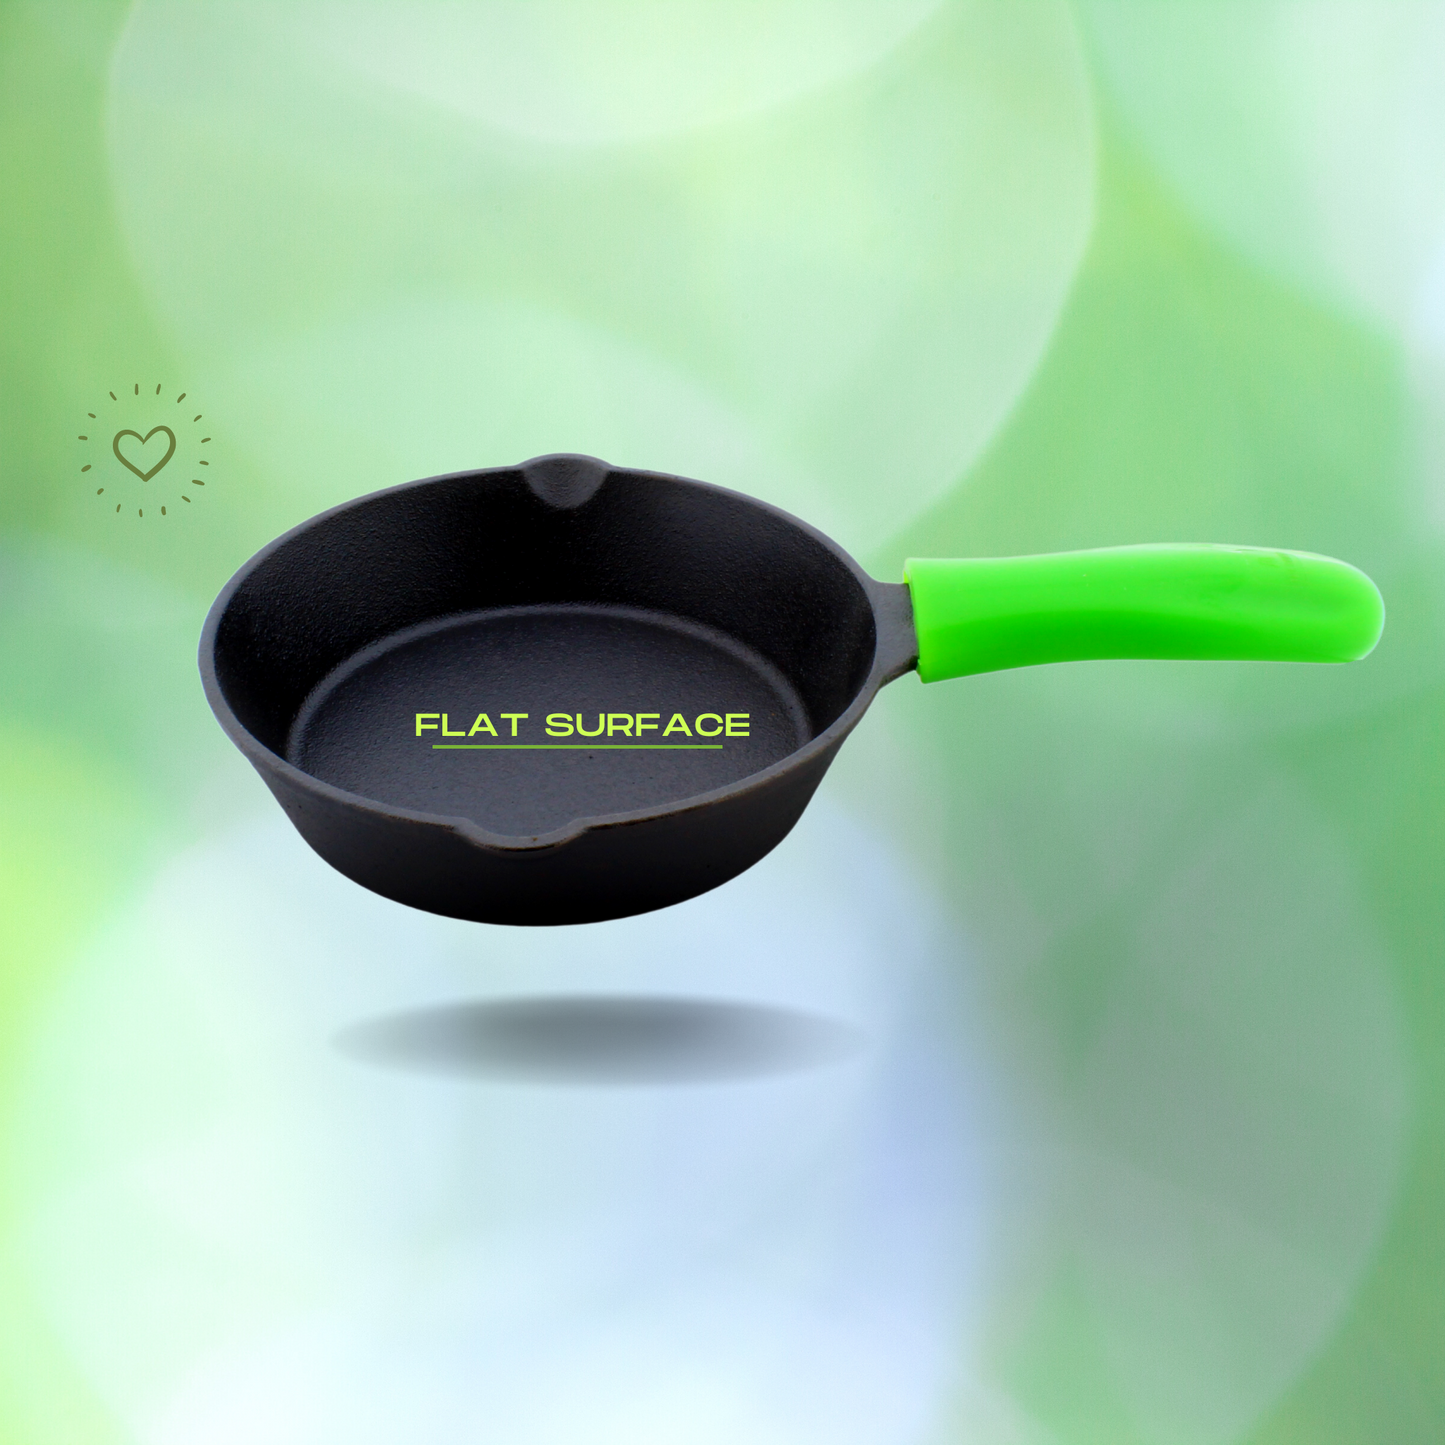 Cast Iron Skillet | Fry Pan | Pre-Seasoned | 8 inches | 1.45 Kgs | Induction Compatible | Free Silicone Heat Proof Sleeve Grip for hot handles